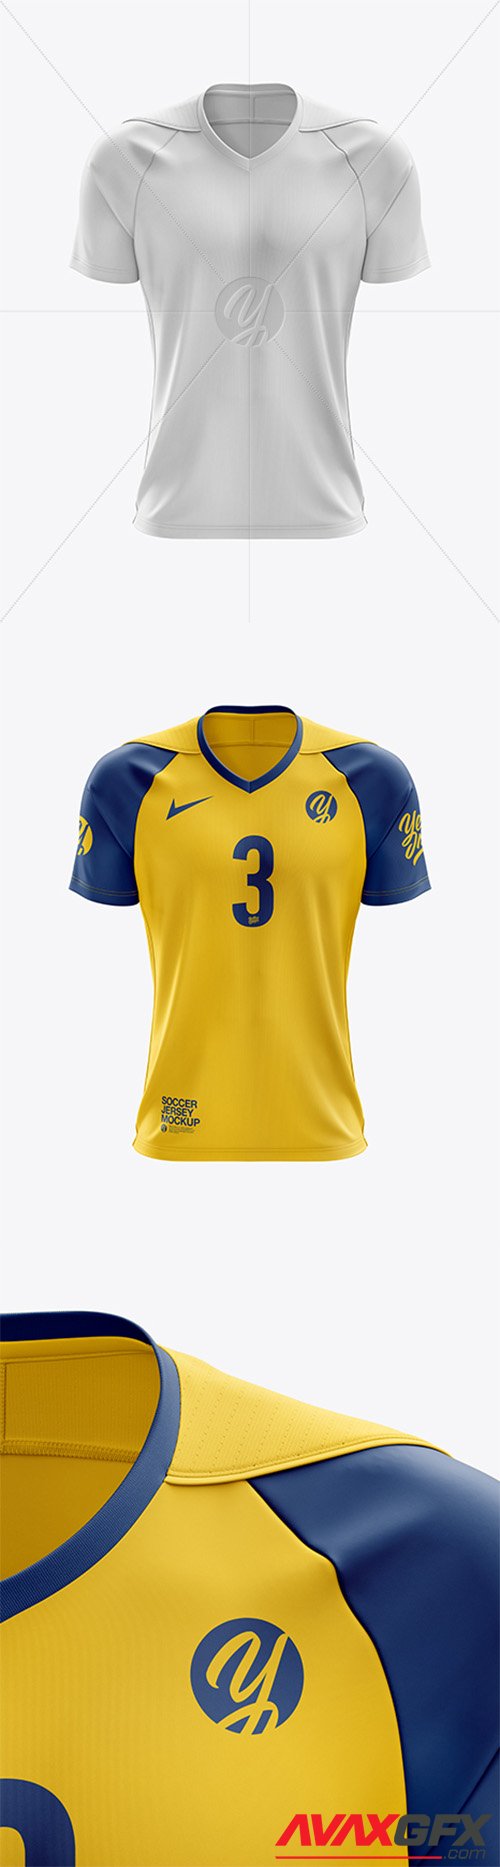 Men’s Soccer Jersey mockup (Front View) 39871